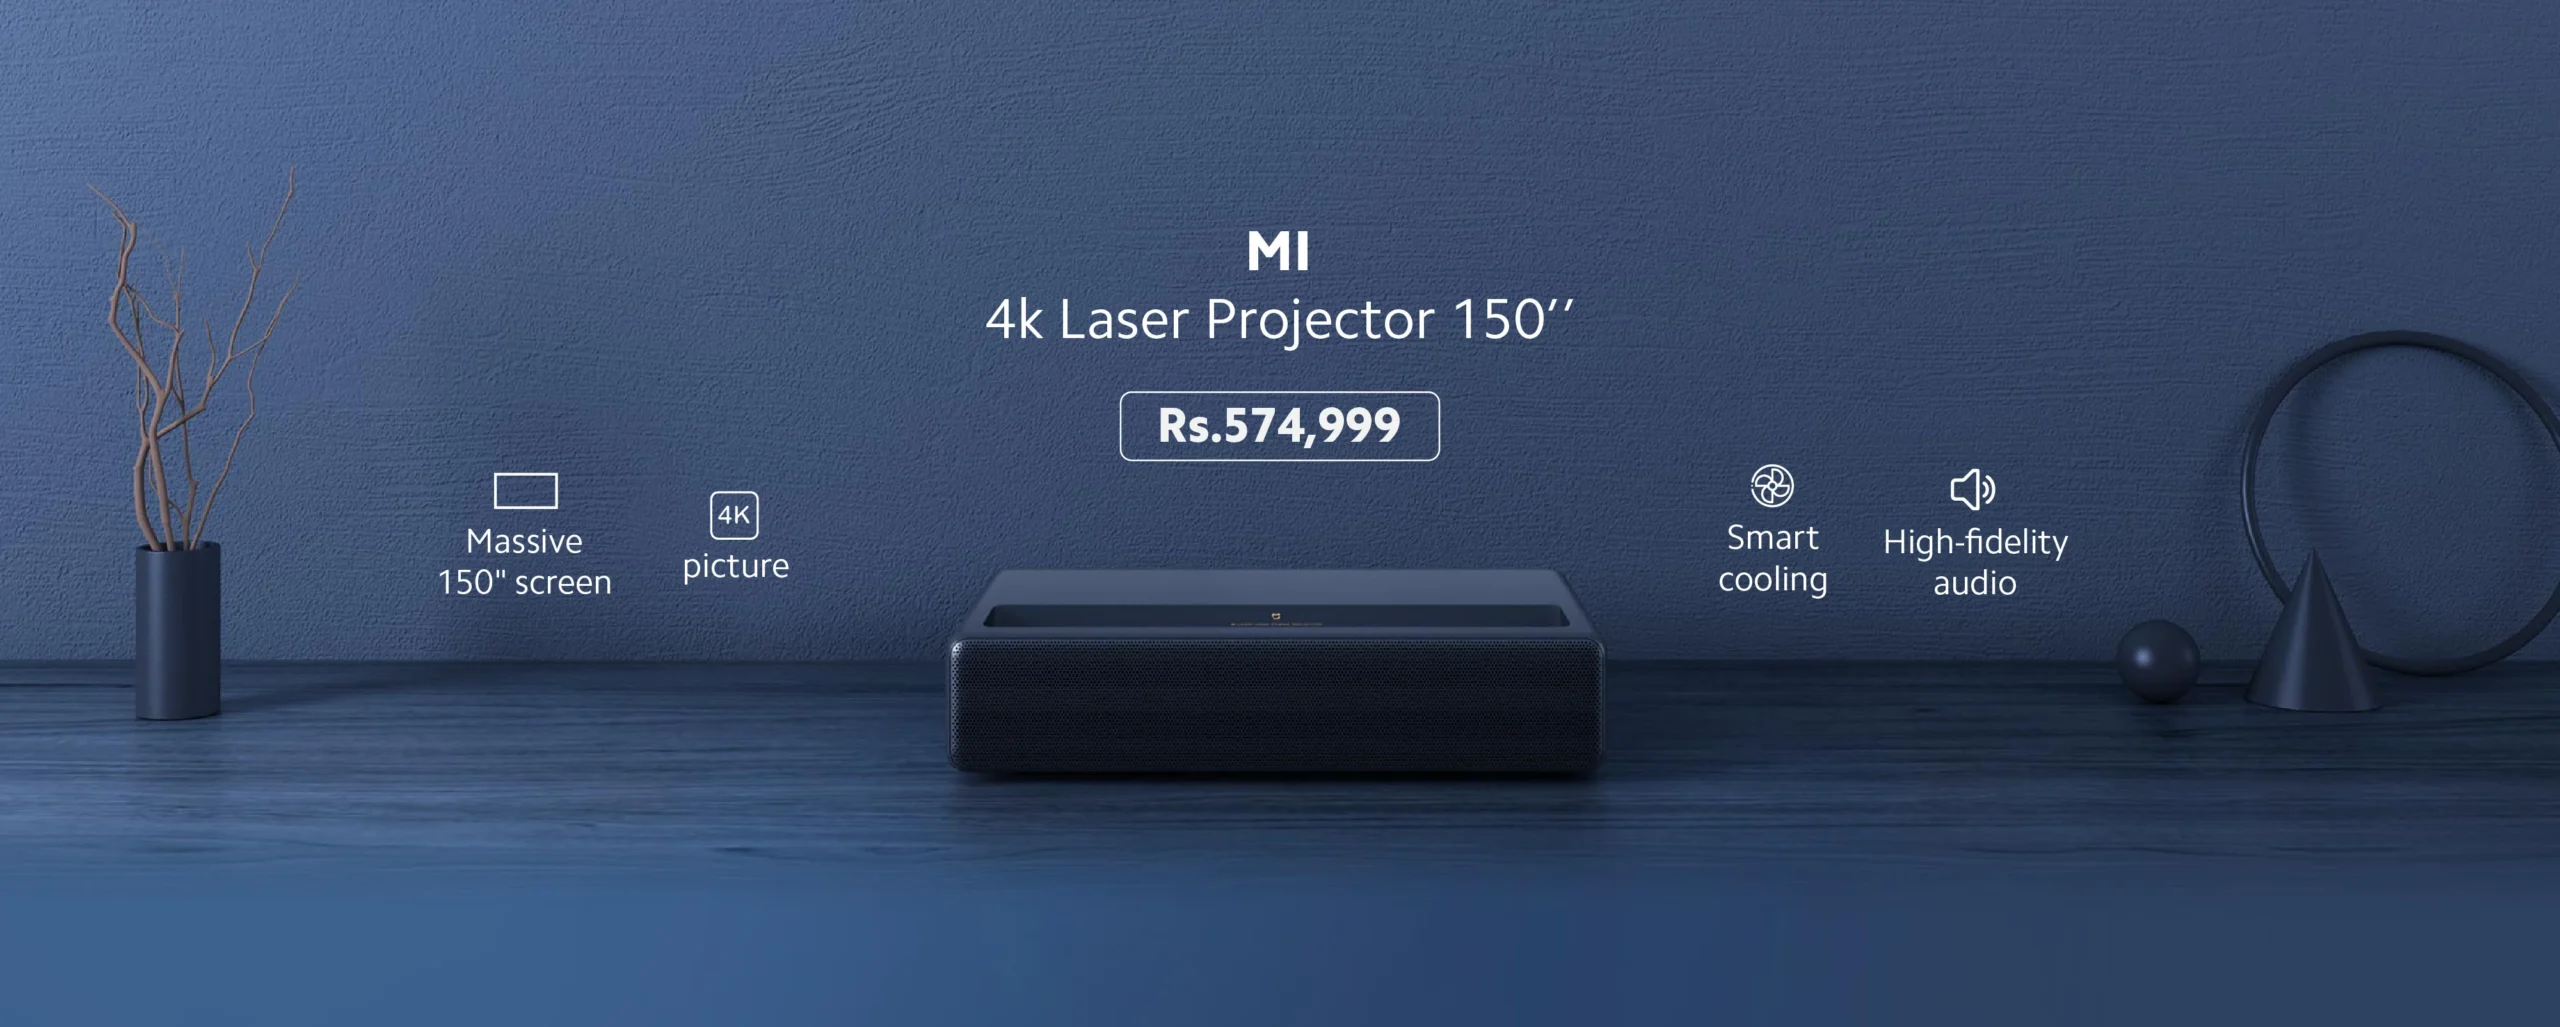 4k_laser_projector_150_banners-03_2